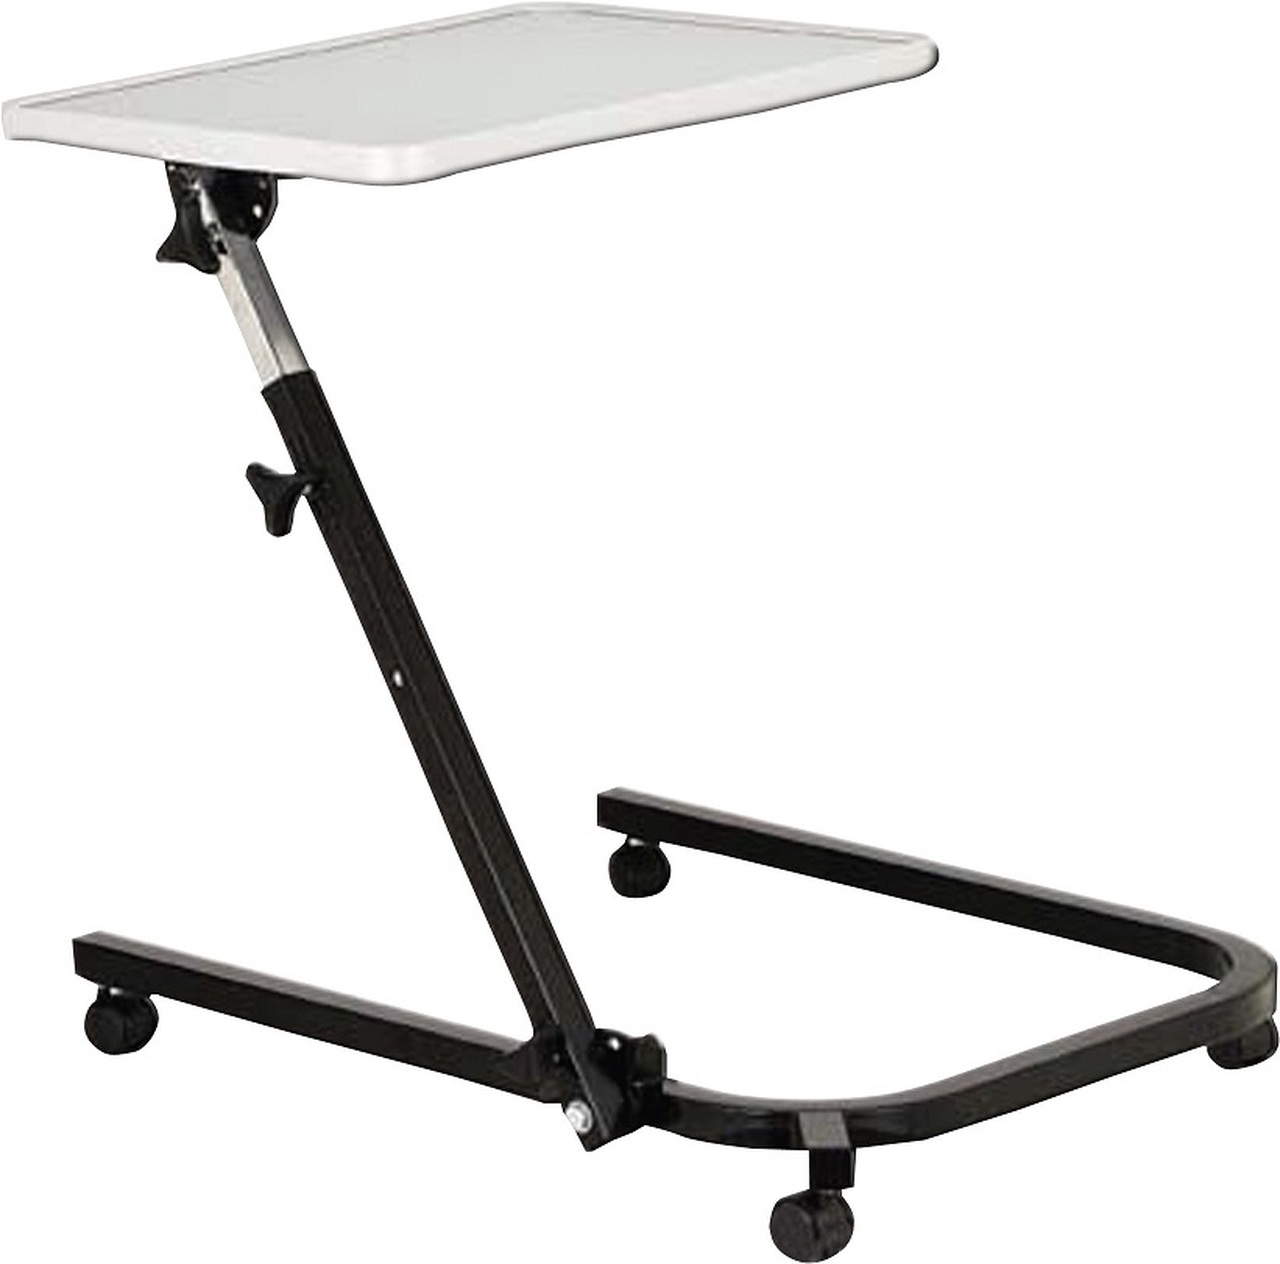 Table-Pivot and Tilt Adjustable Overbed Table Tray